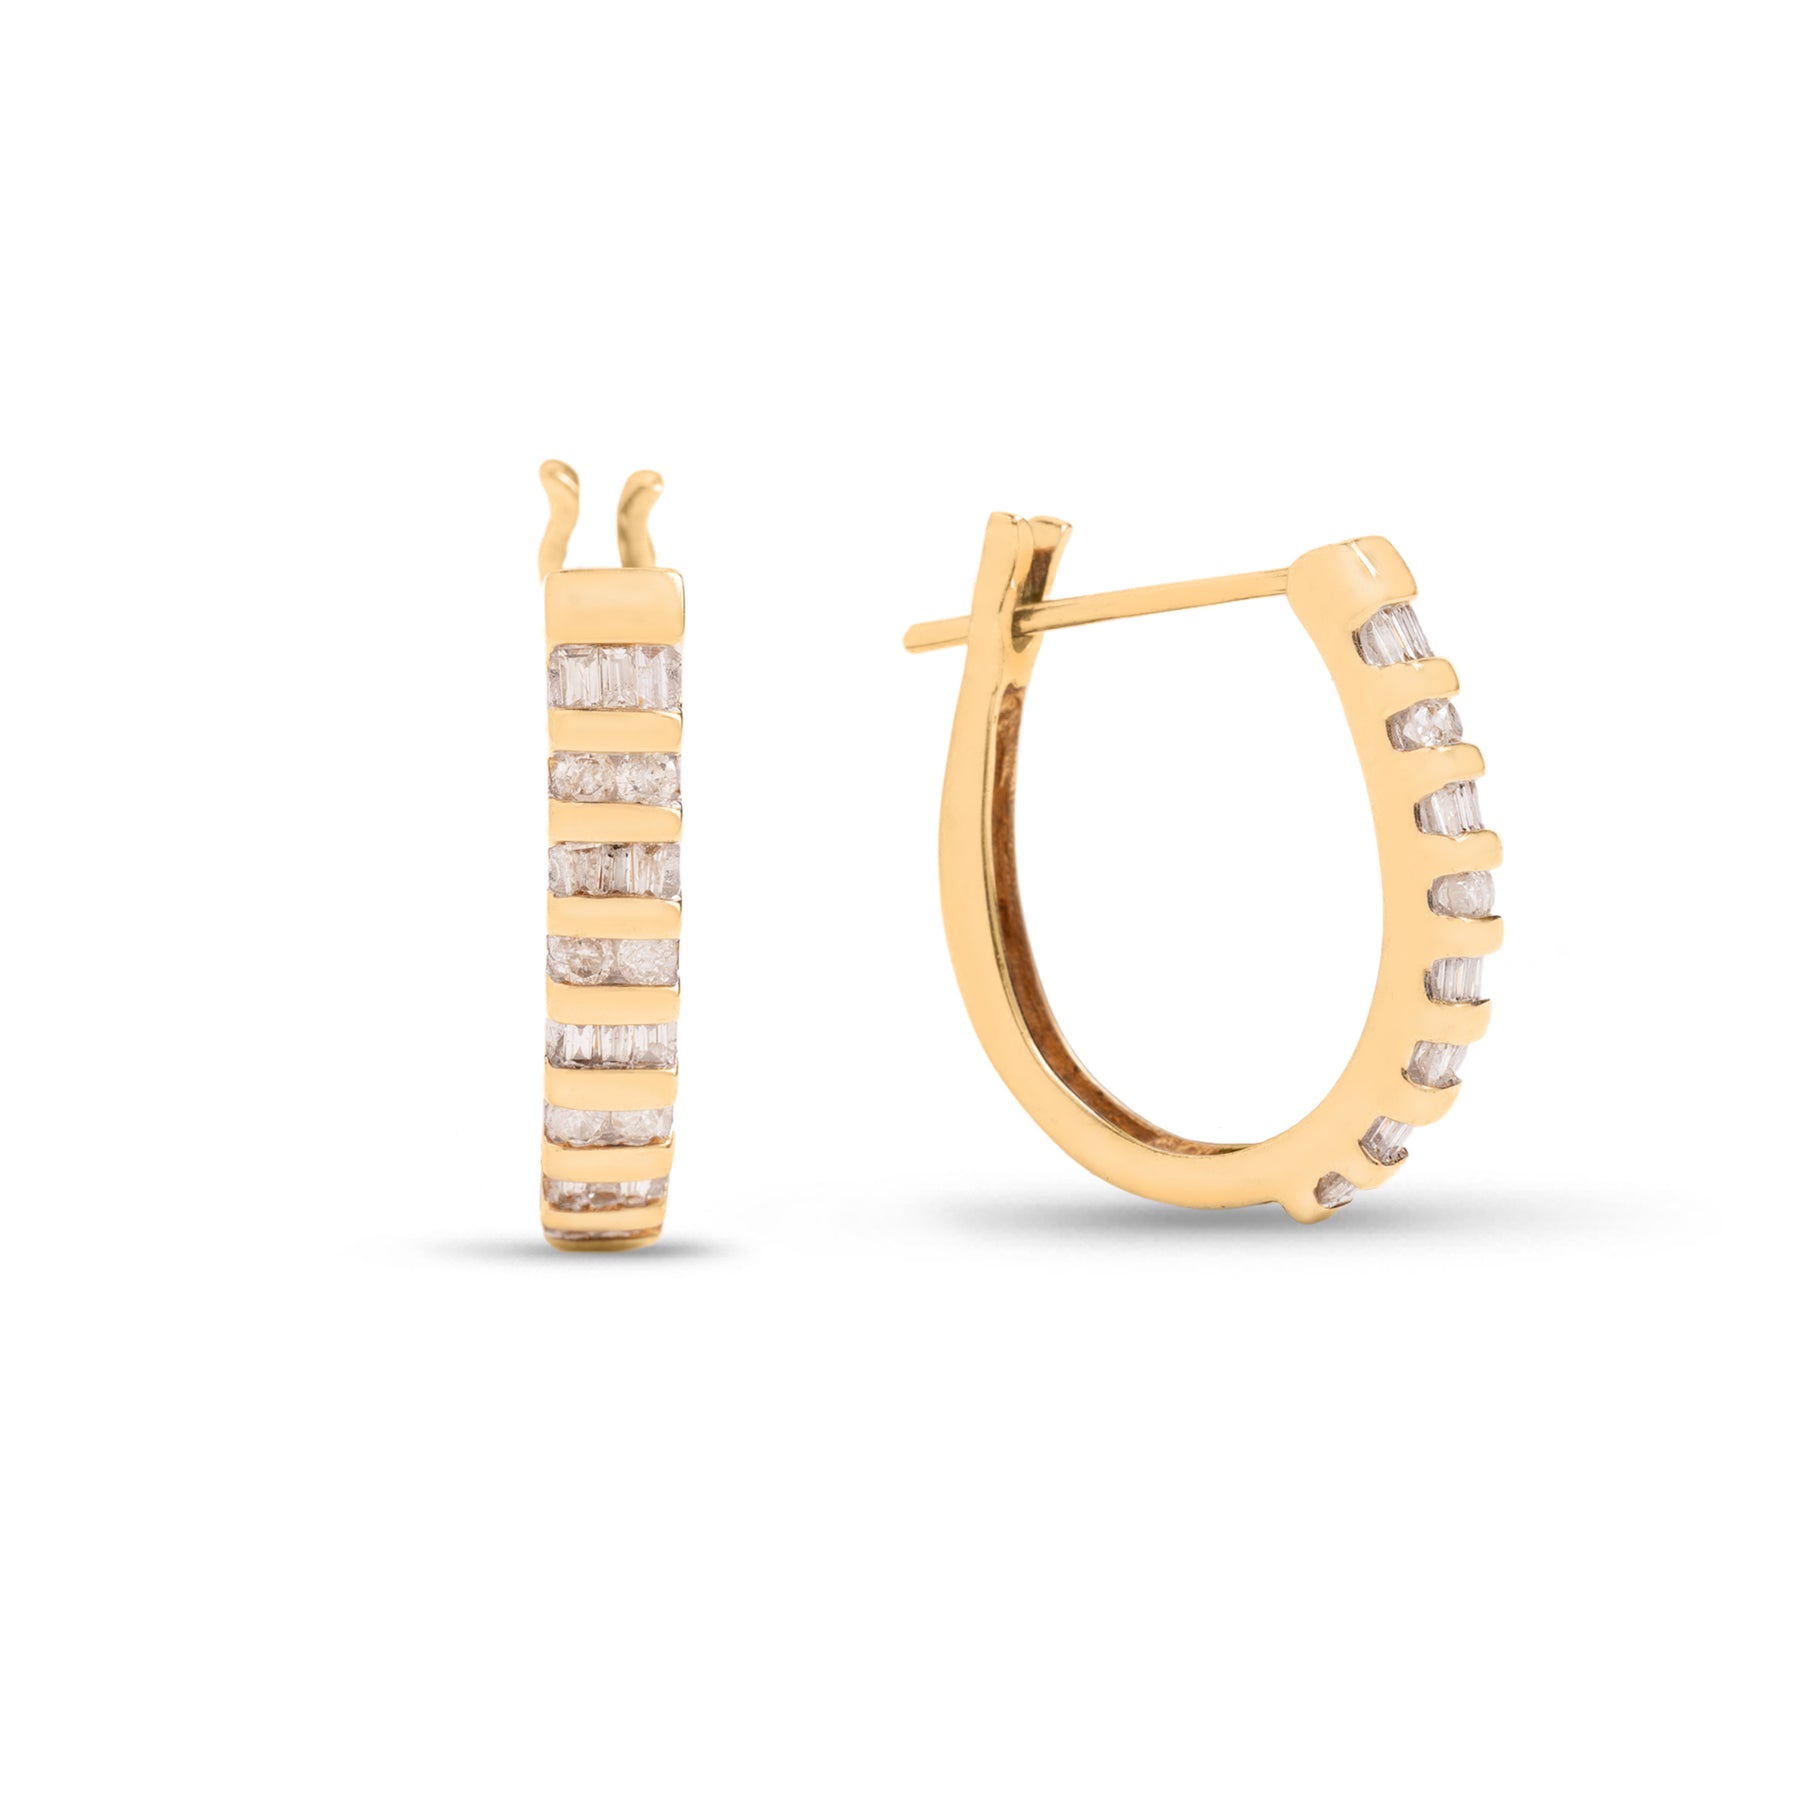 10k yellow gold estate round and baguette diamond earrings